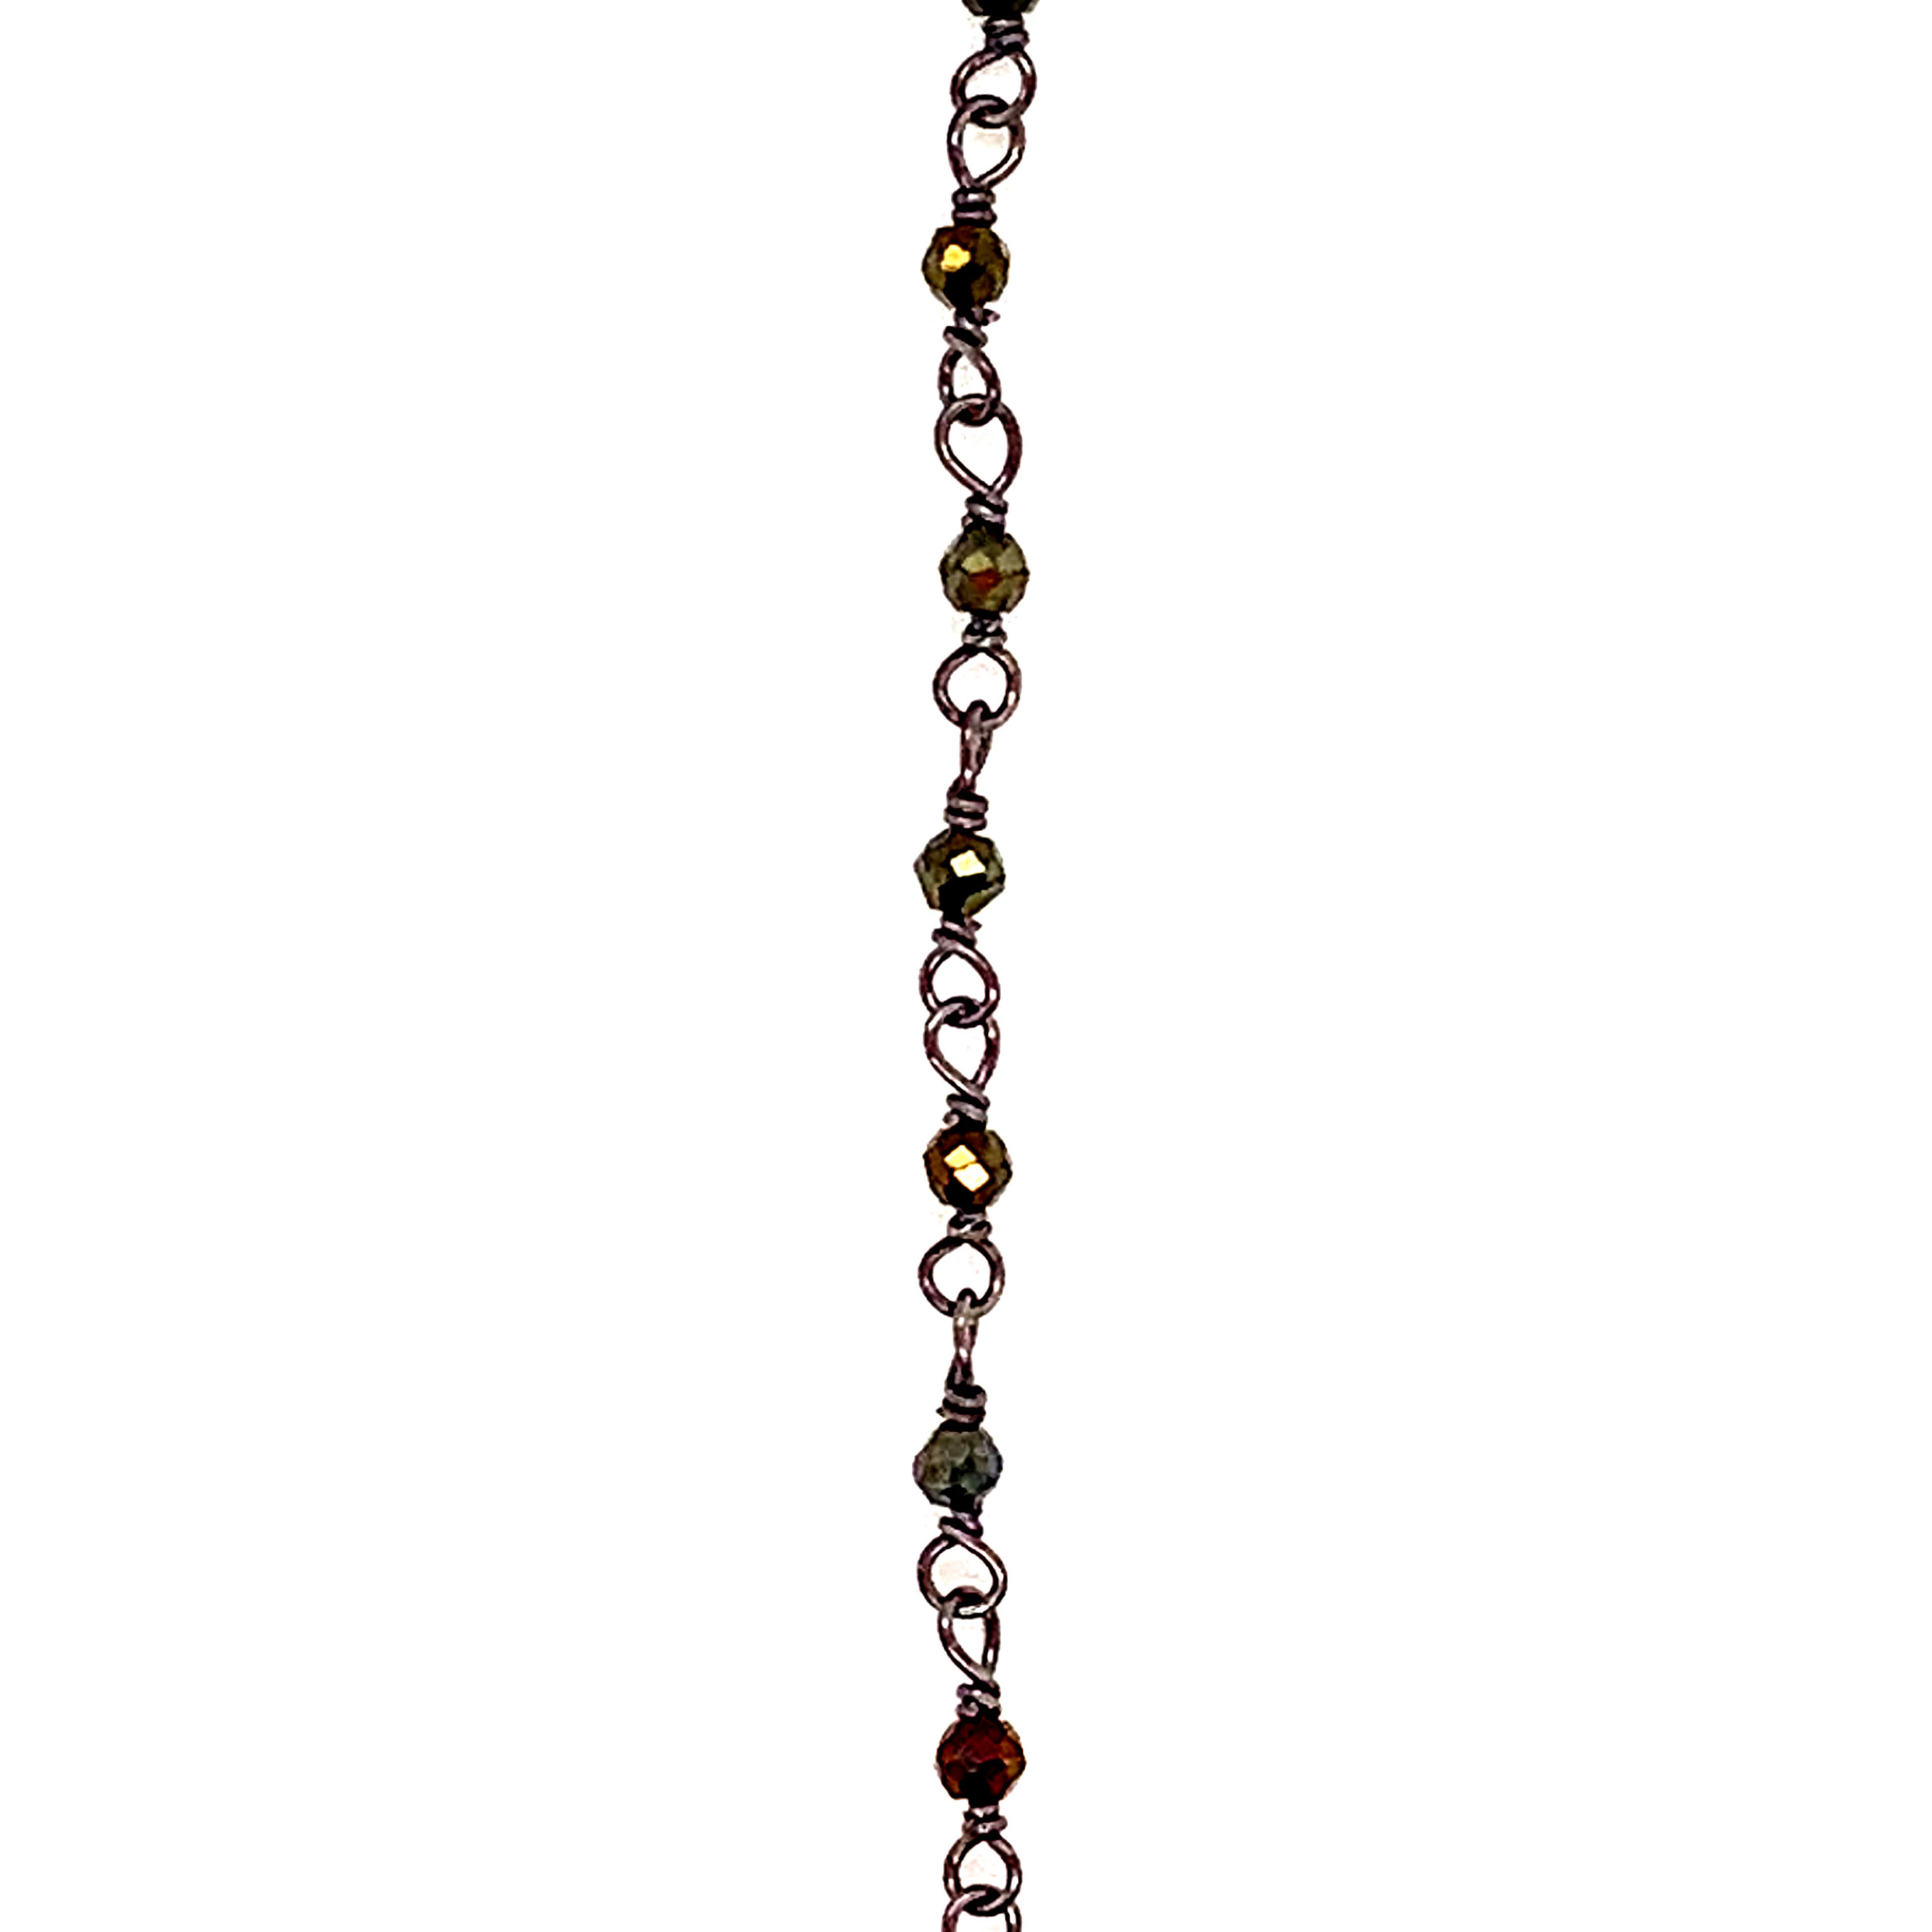 2mm Mystic Spinel Chain - Black Rhodium Plated - Price Per Foot